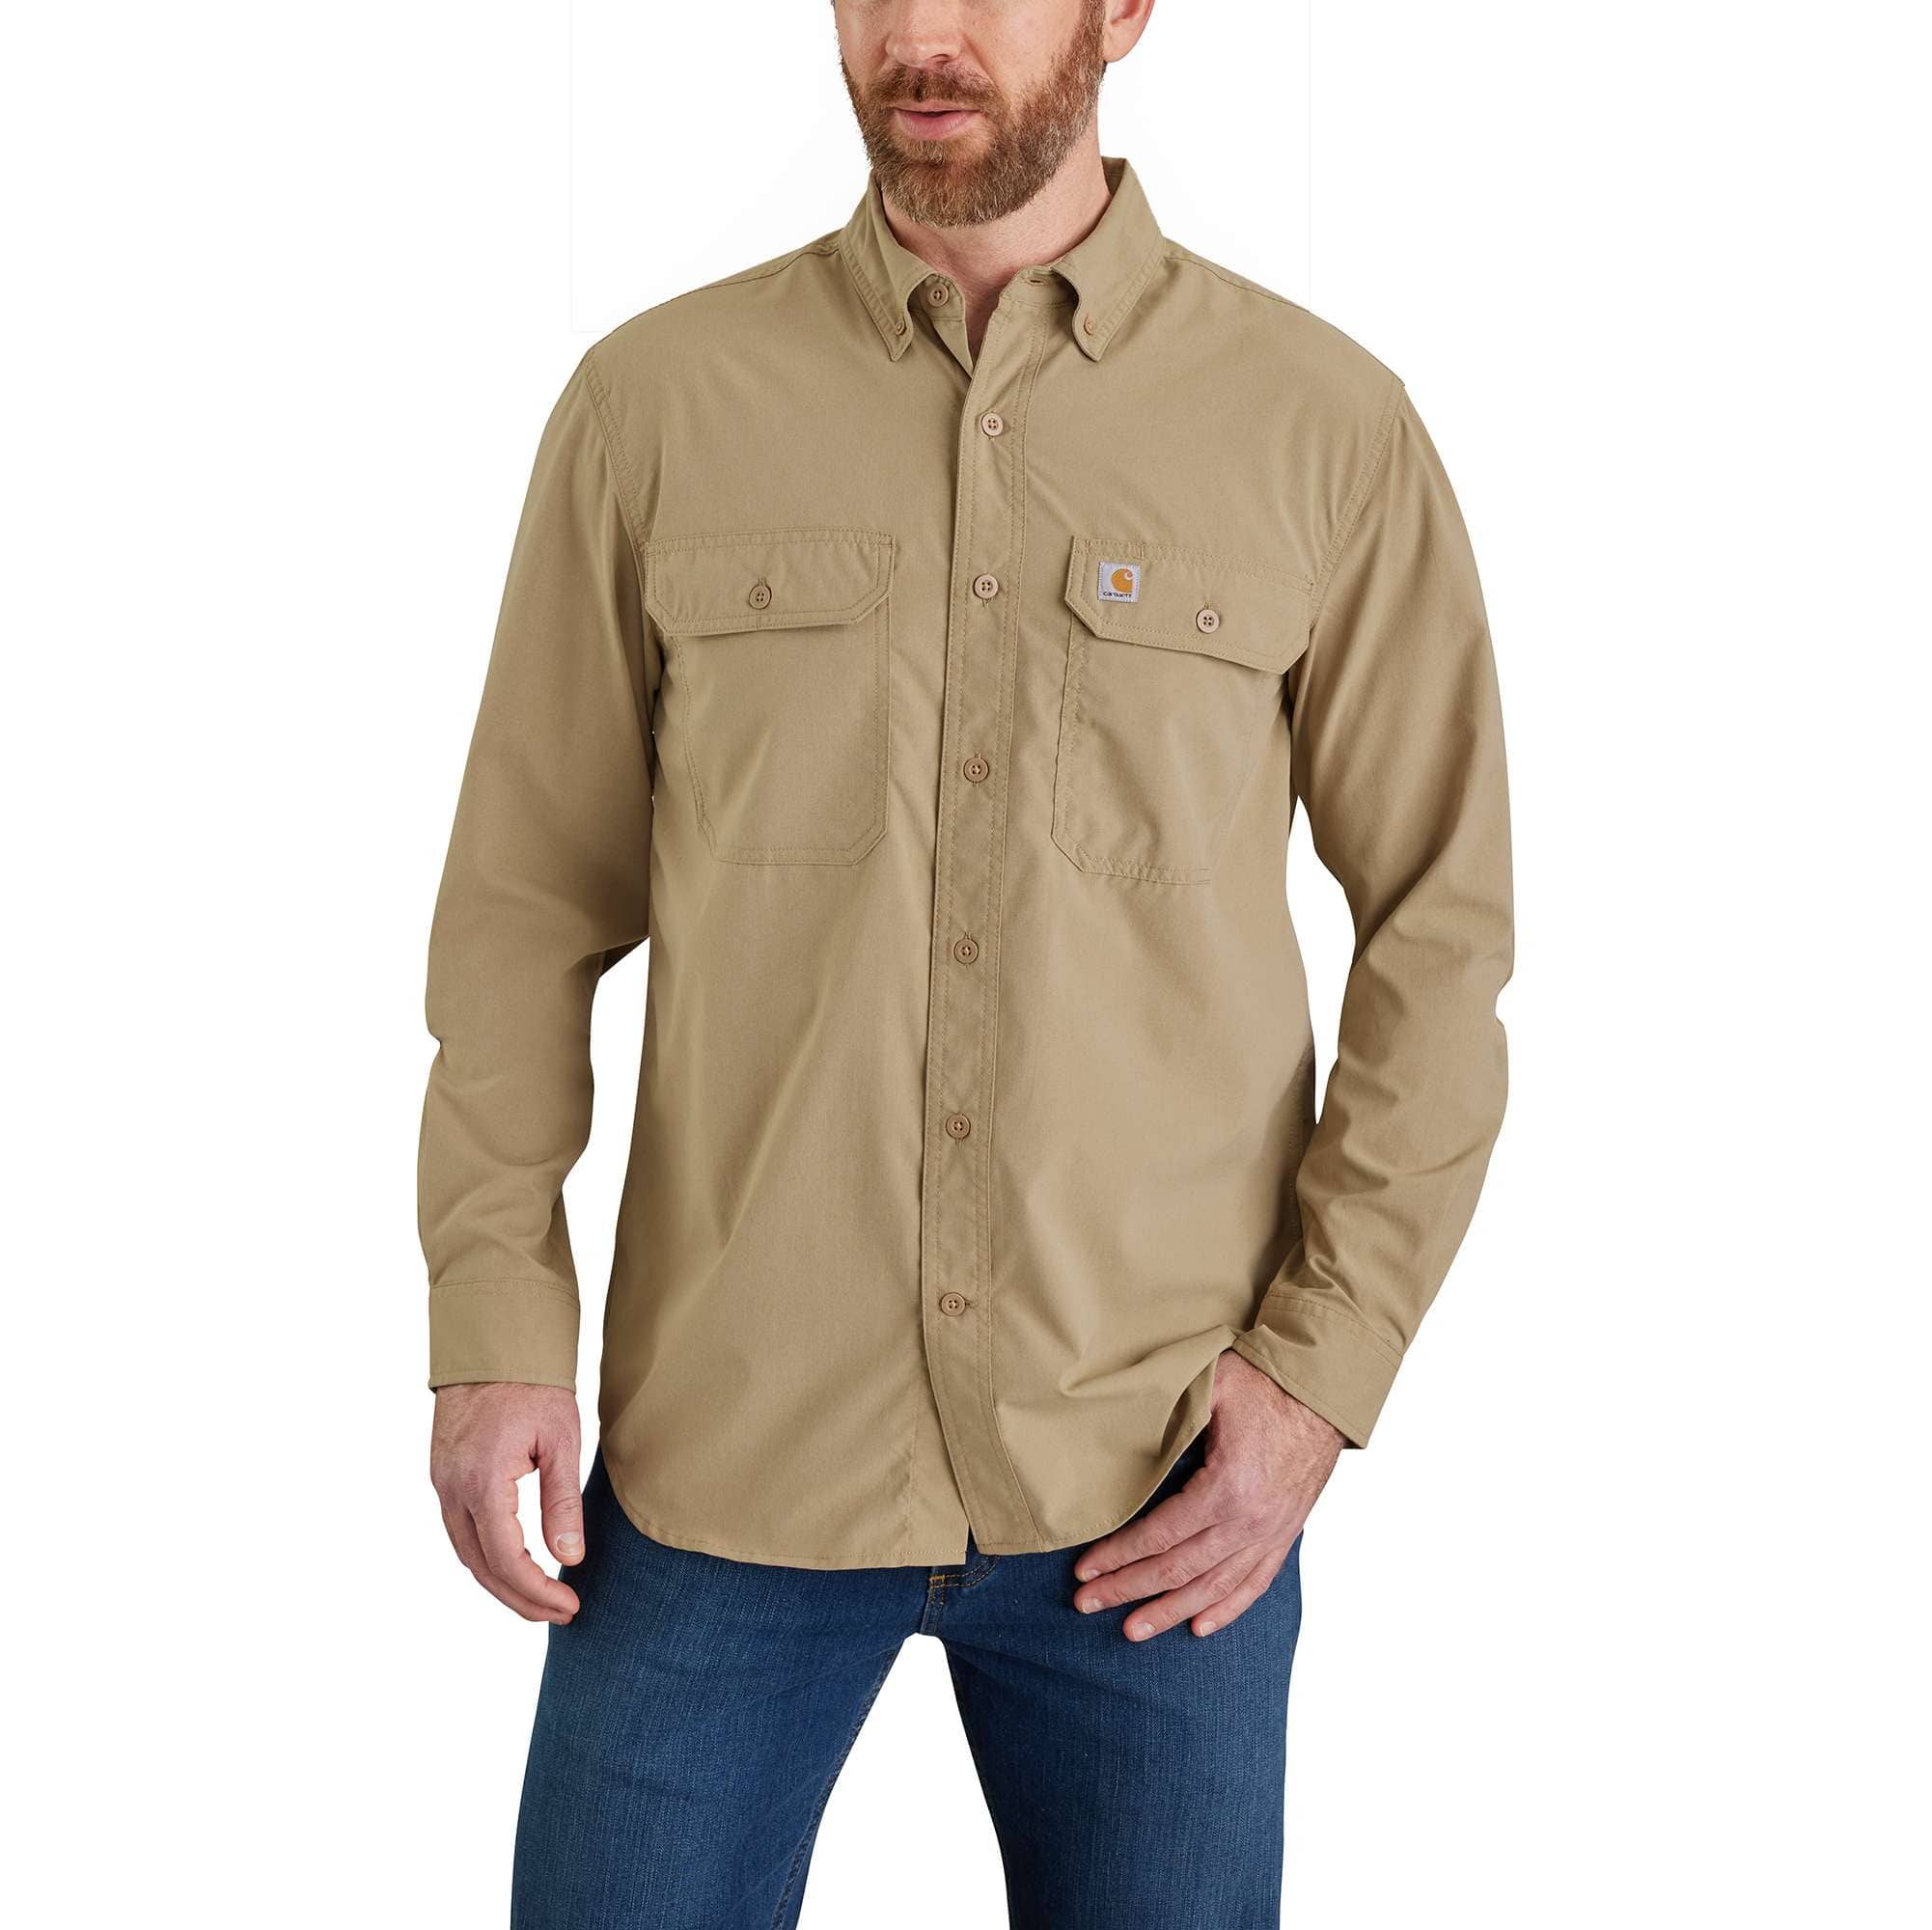 Carhartt Force Shirt Large Brown/Khaki Relaxed Fit Vented Short Sleeve  Fishing